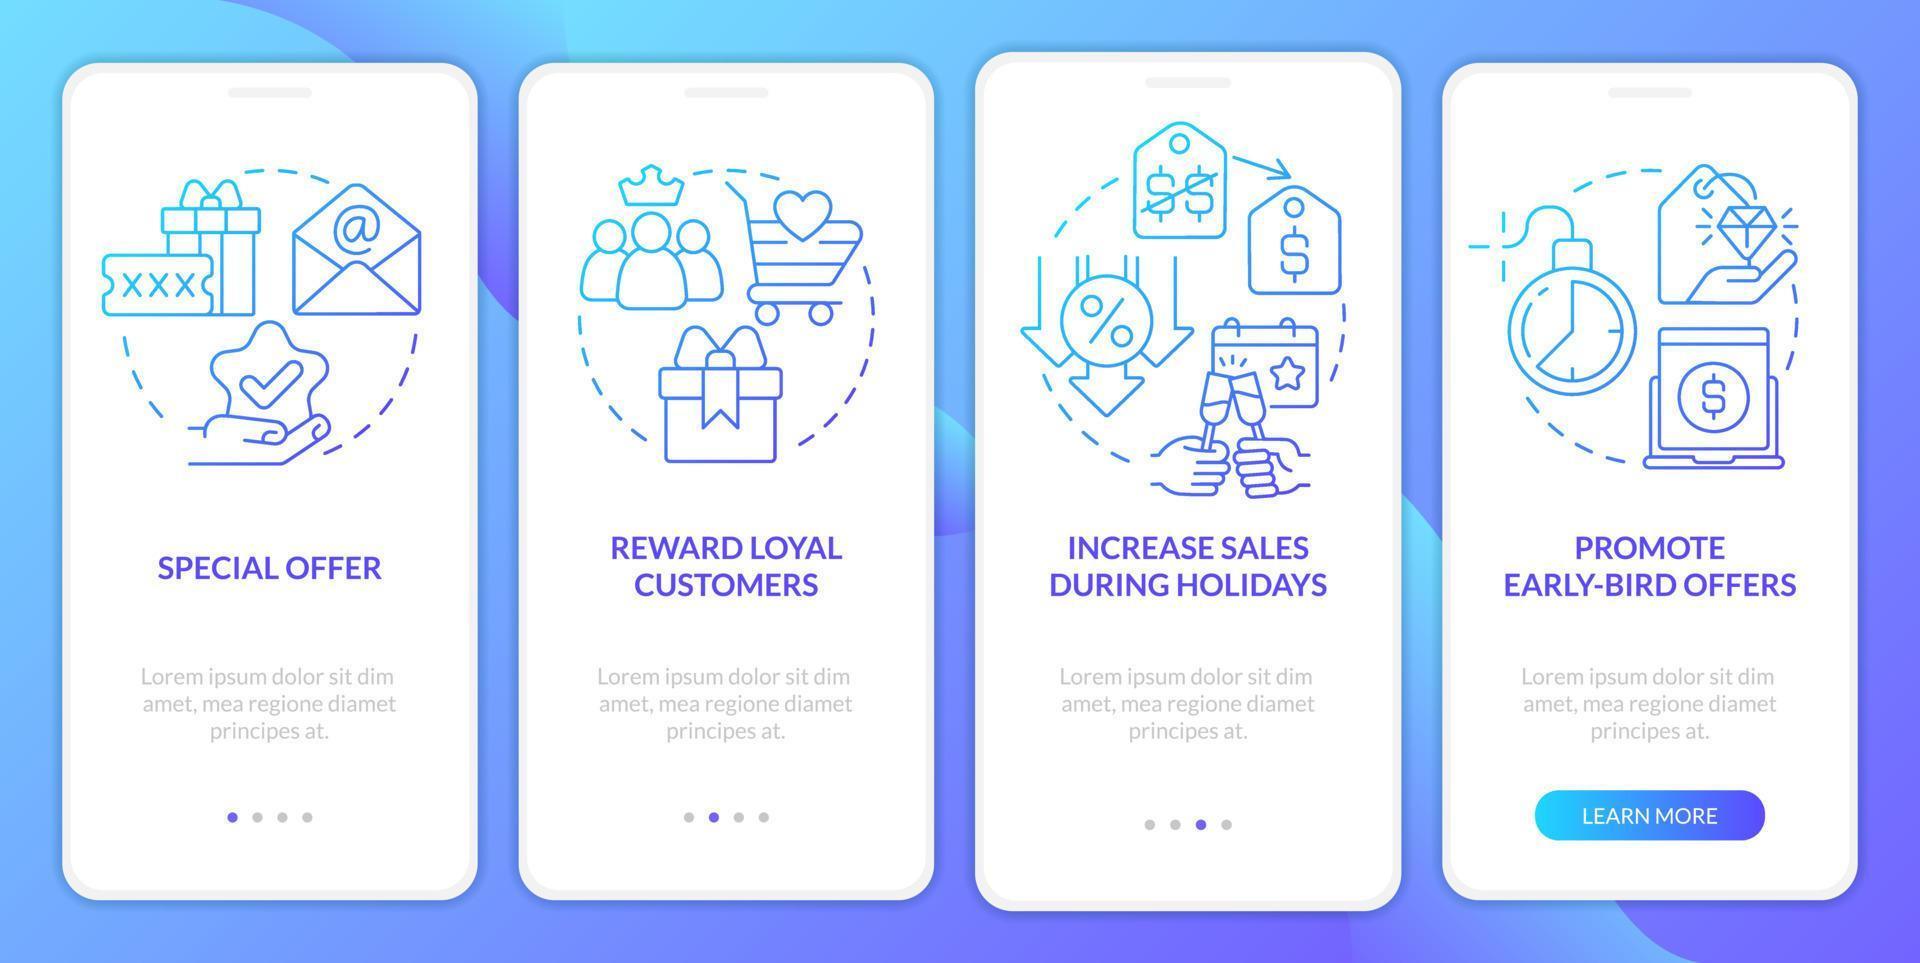 Discount policy blue gradient onboarding mobile app screen. Marketing walkthrough 4 steps graphic instructions with linear concepts. UI, UX, GUI template vector